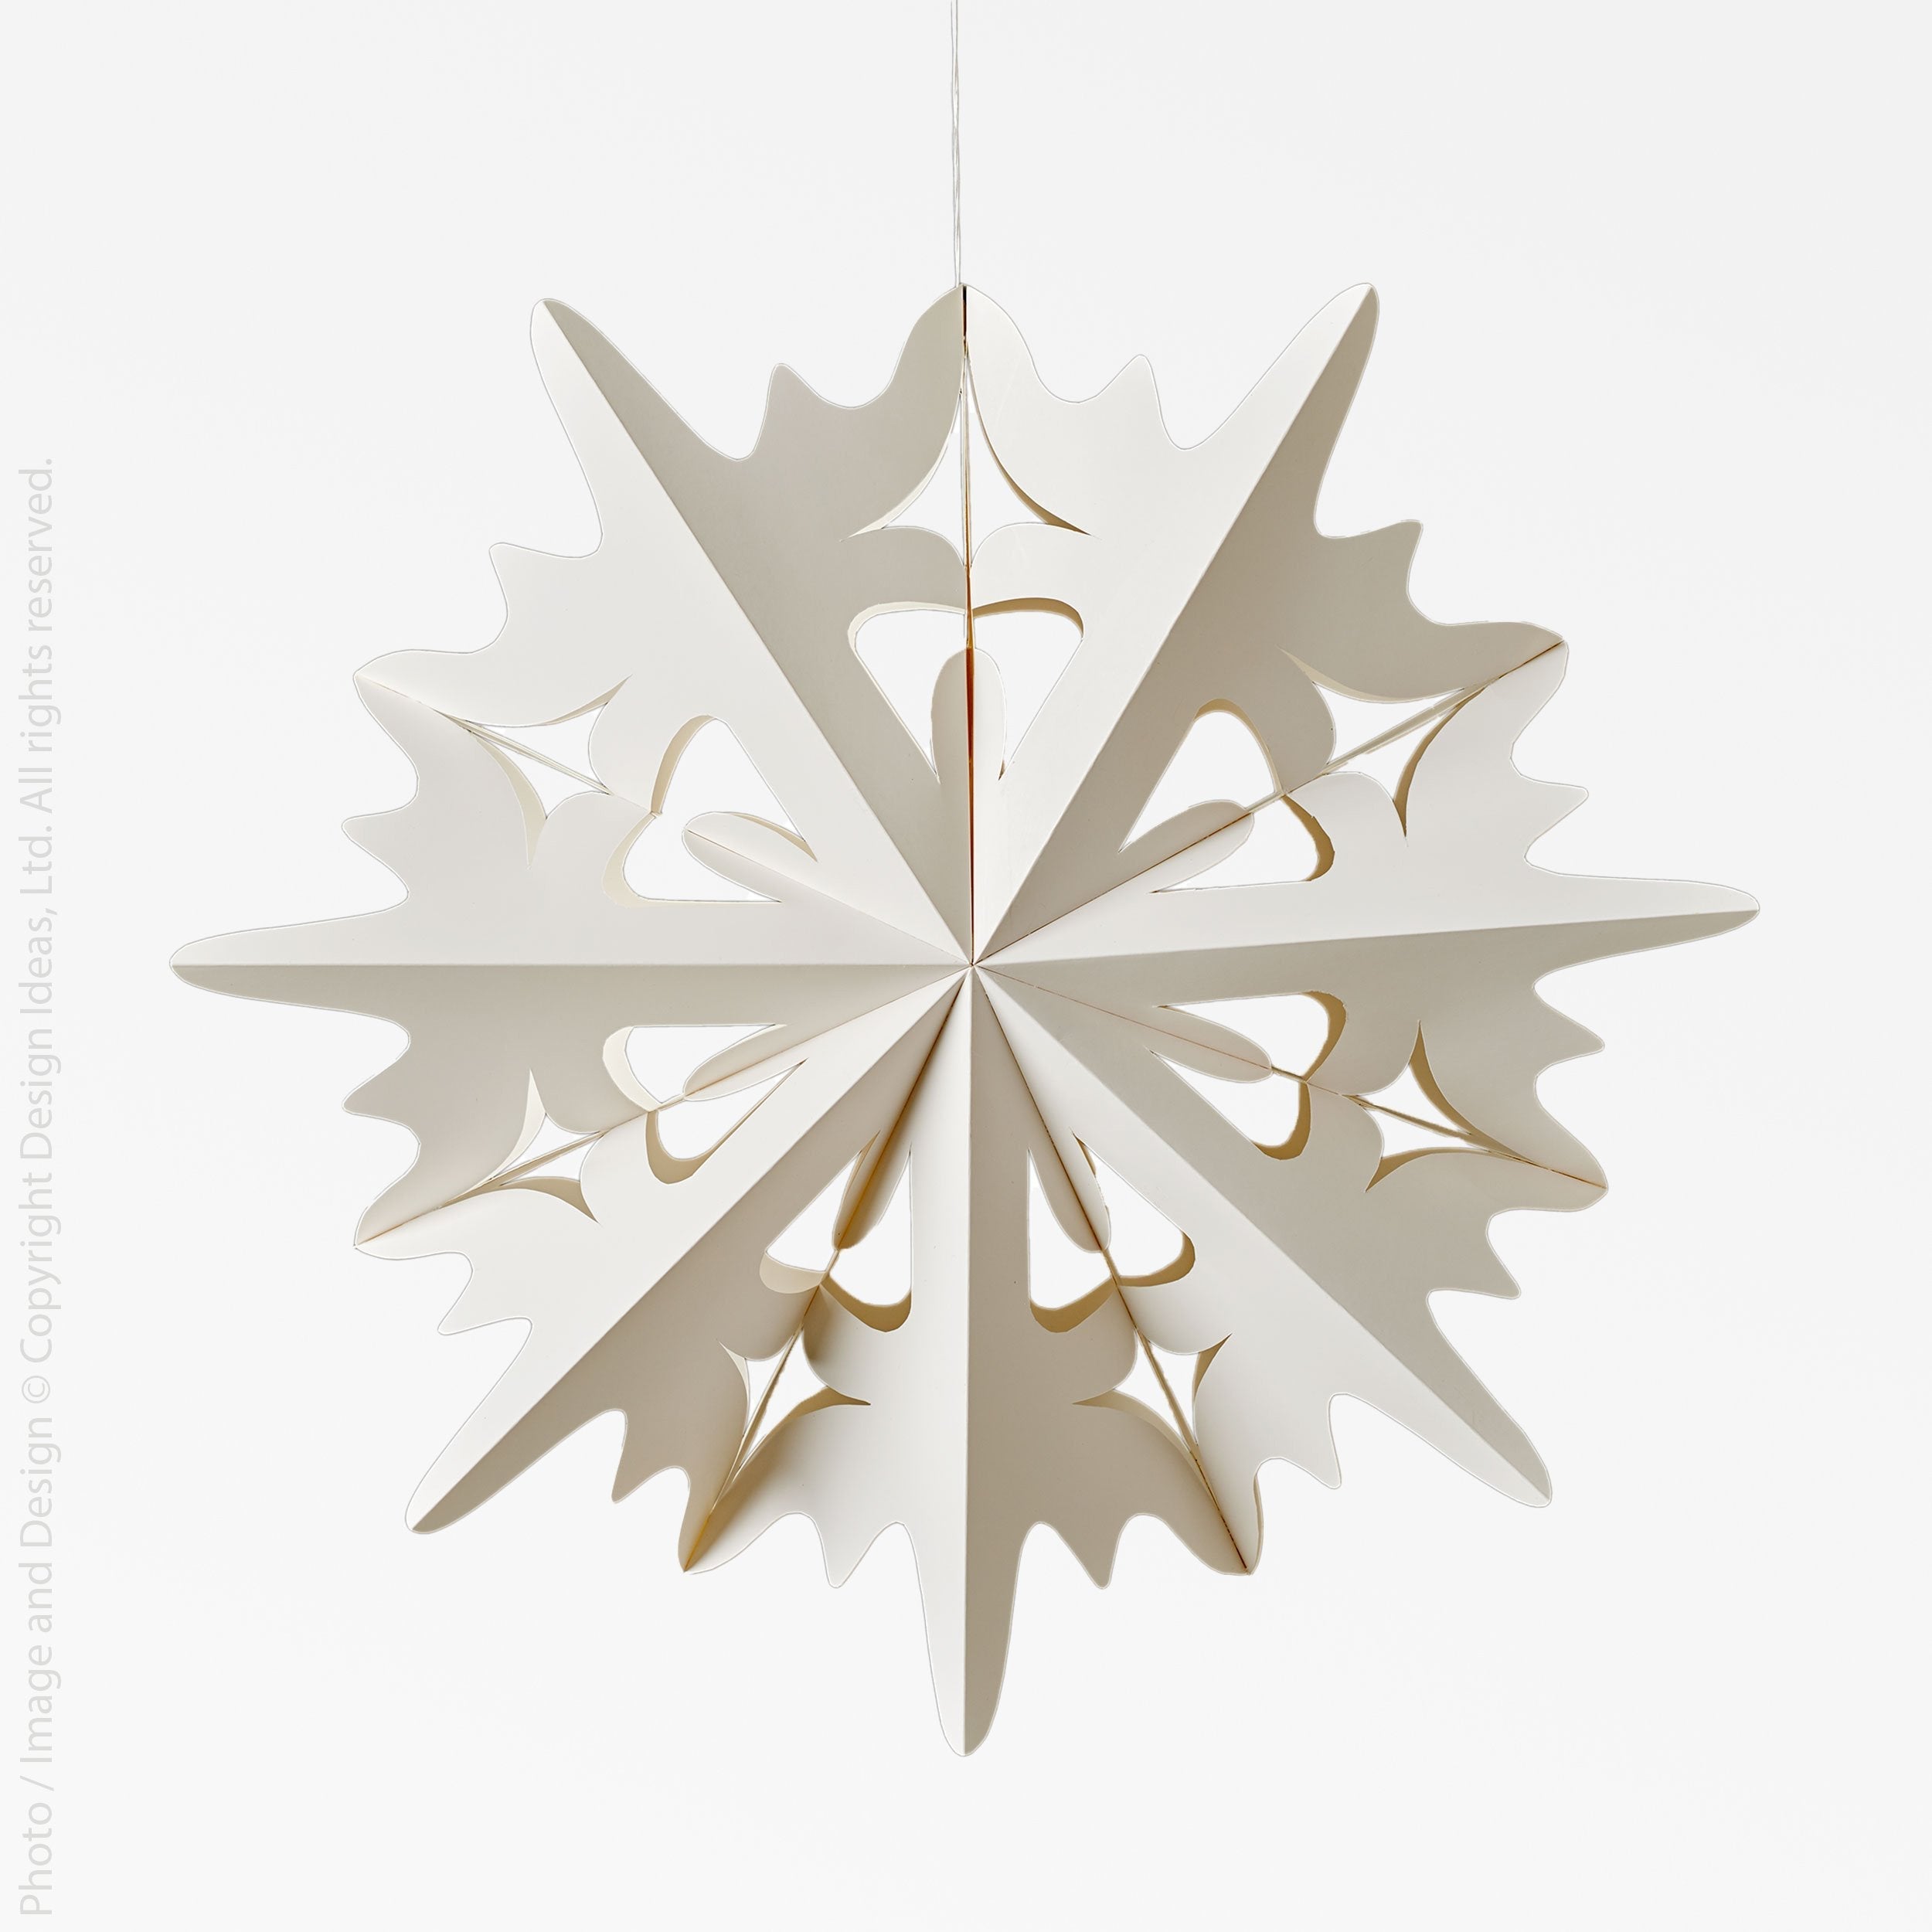 Large Snowflakes Extra Large Outdoor Christmas India